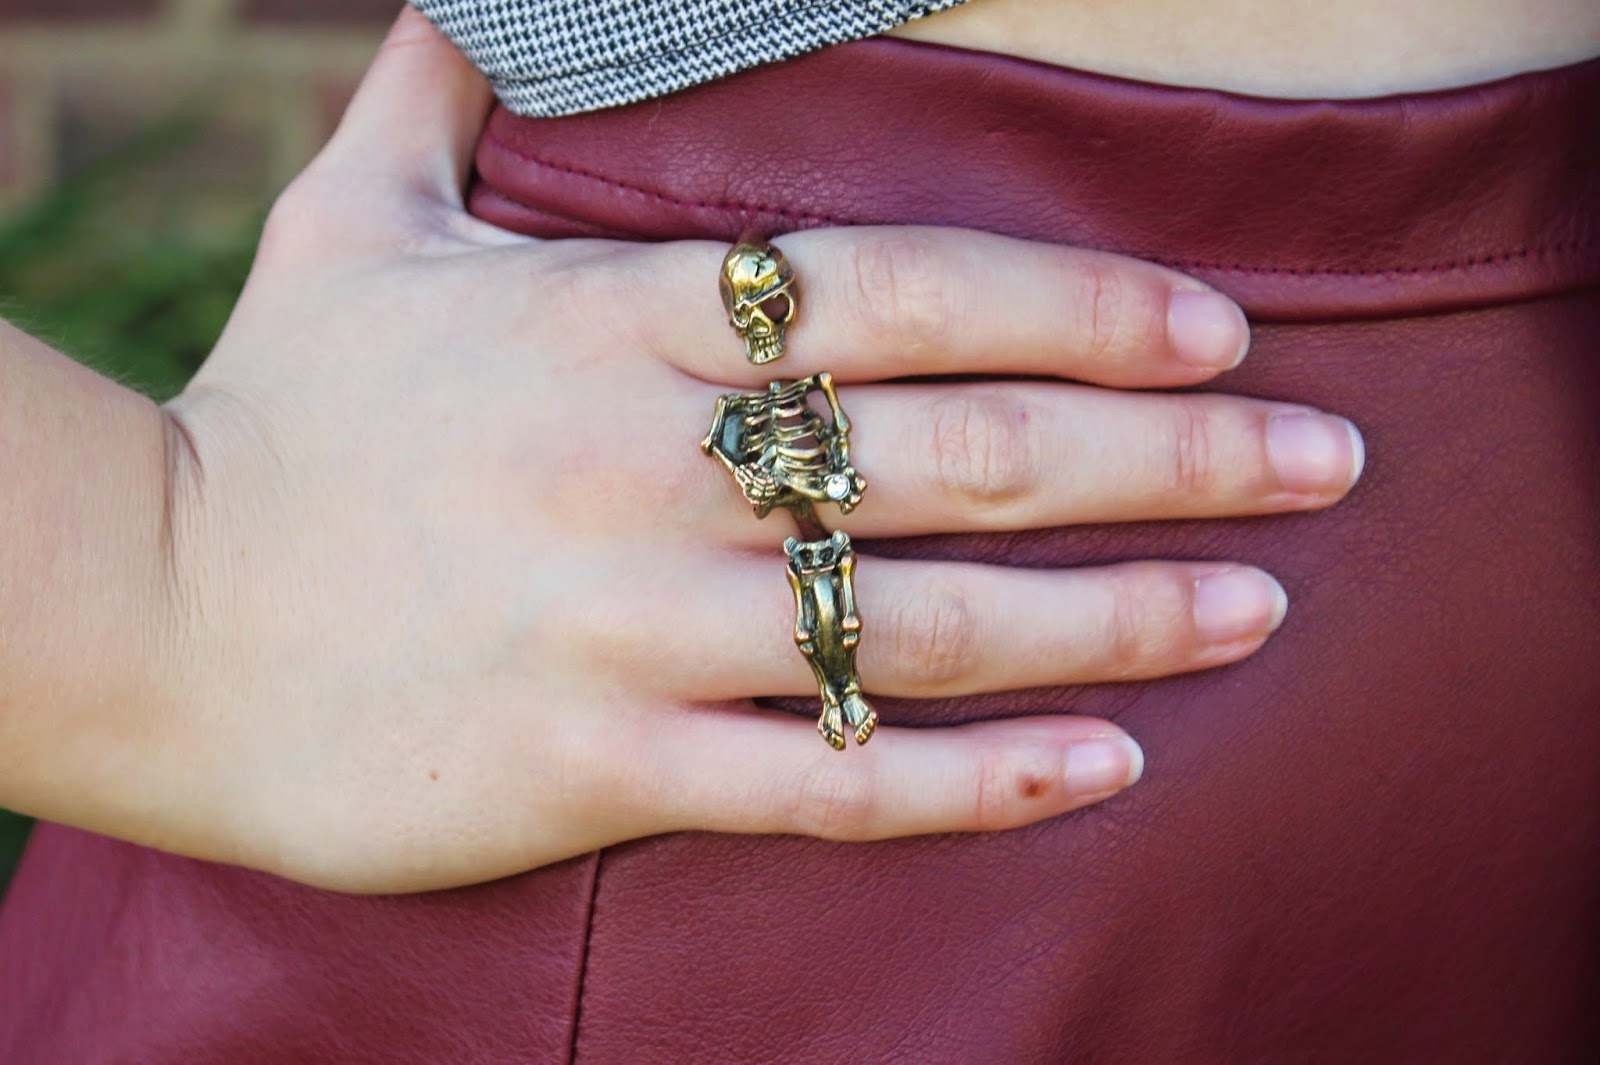 blogger-accessories-inspiration-fashion-ring-jewelry-vintage-camden-skeleton